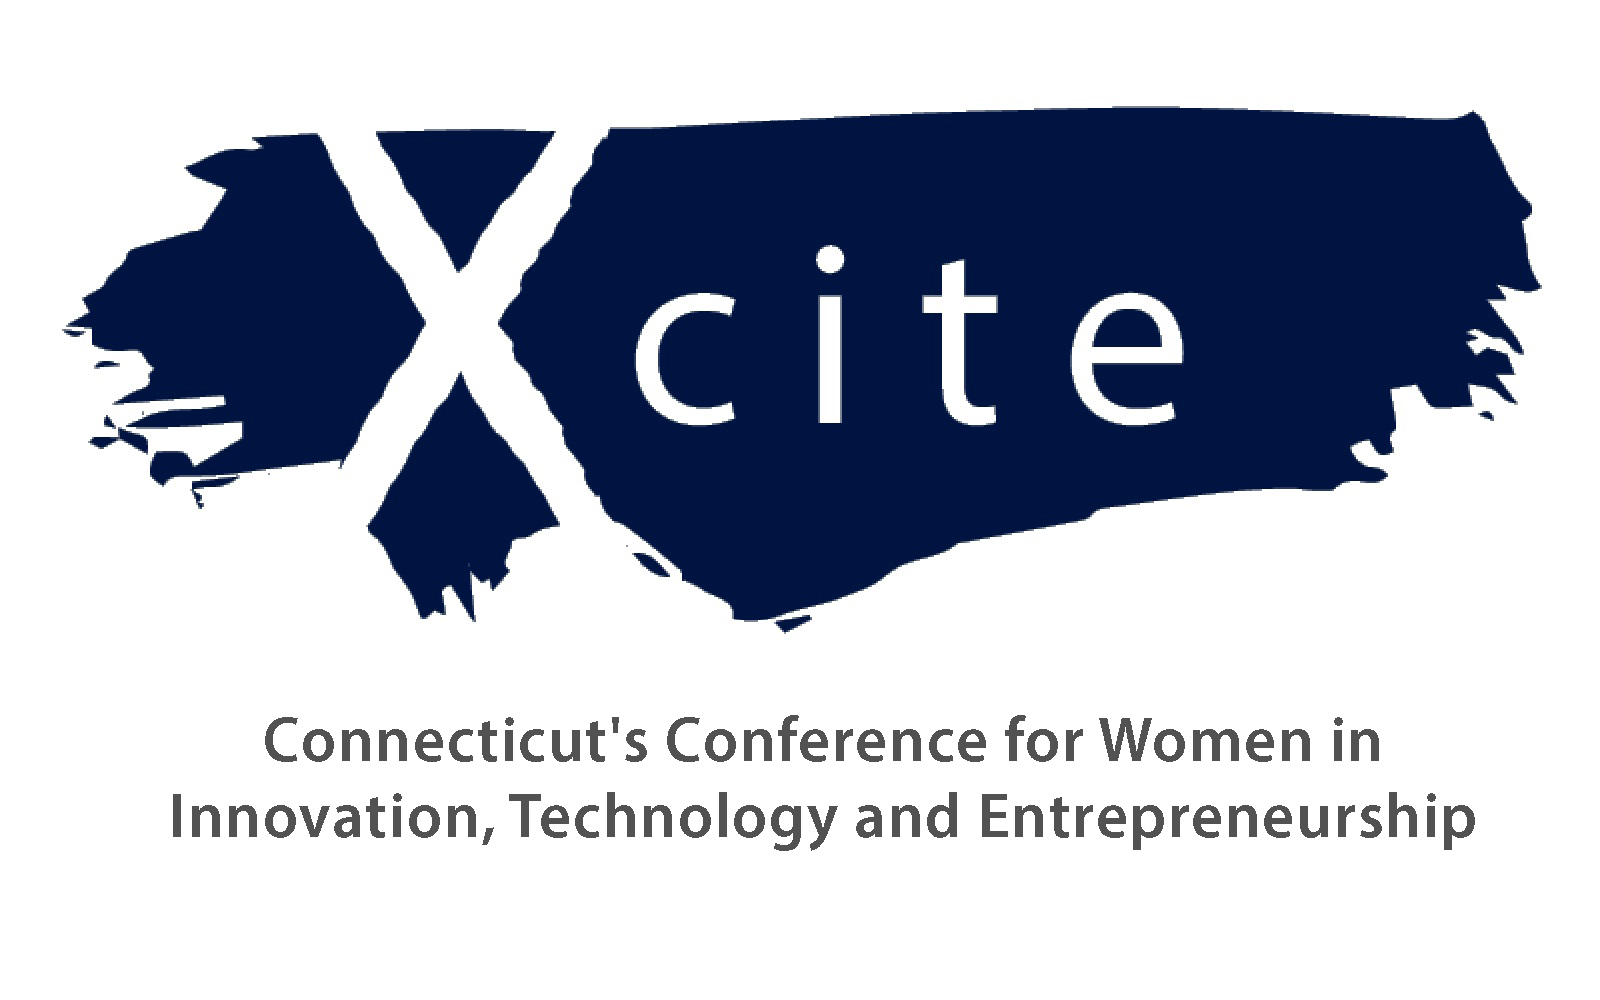 Xcite - Connecticut's Conference for Women in Innovation, Technology and Entrepreneurship 